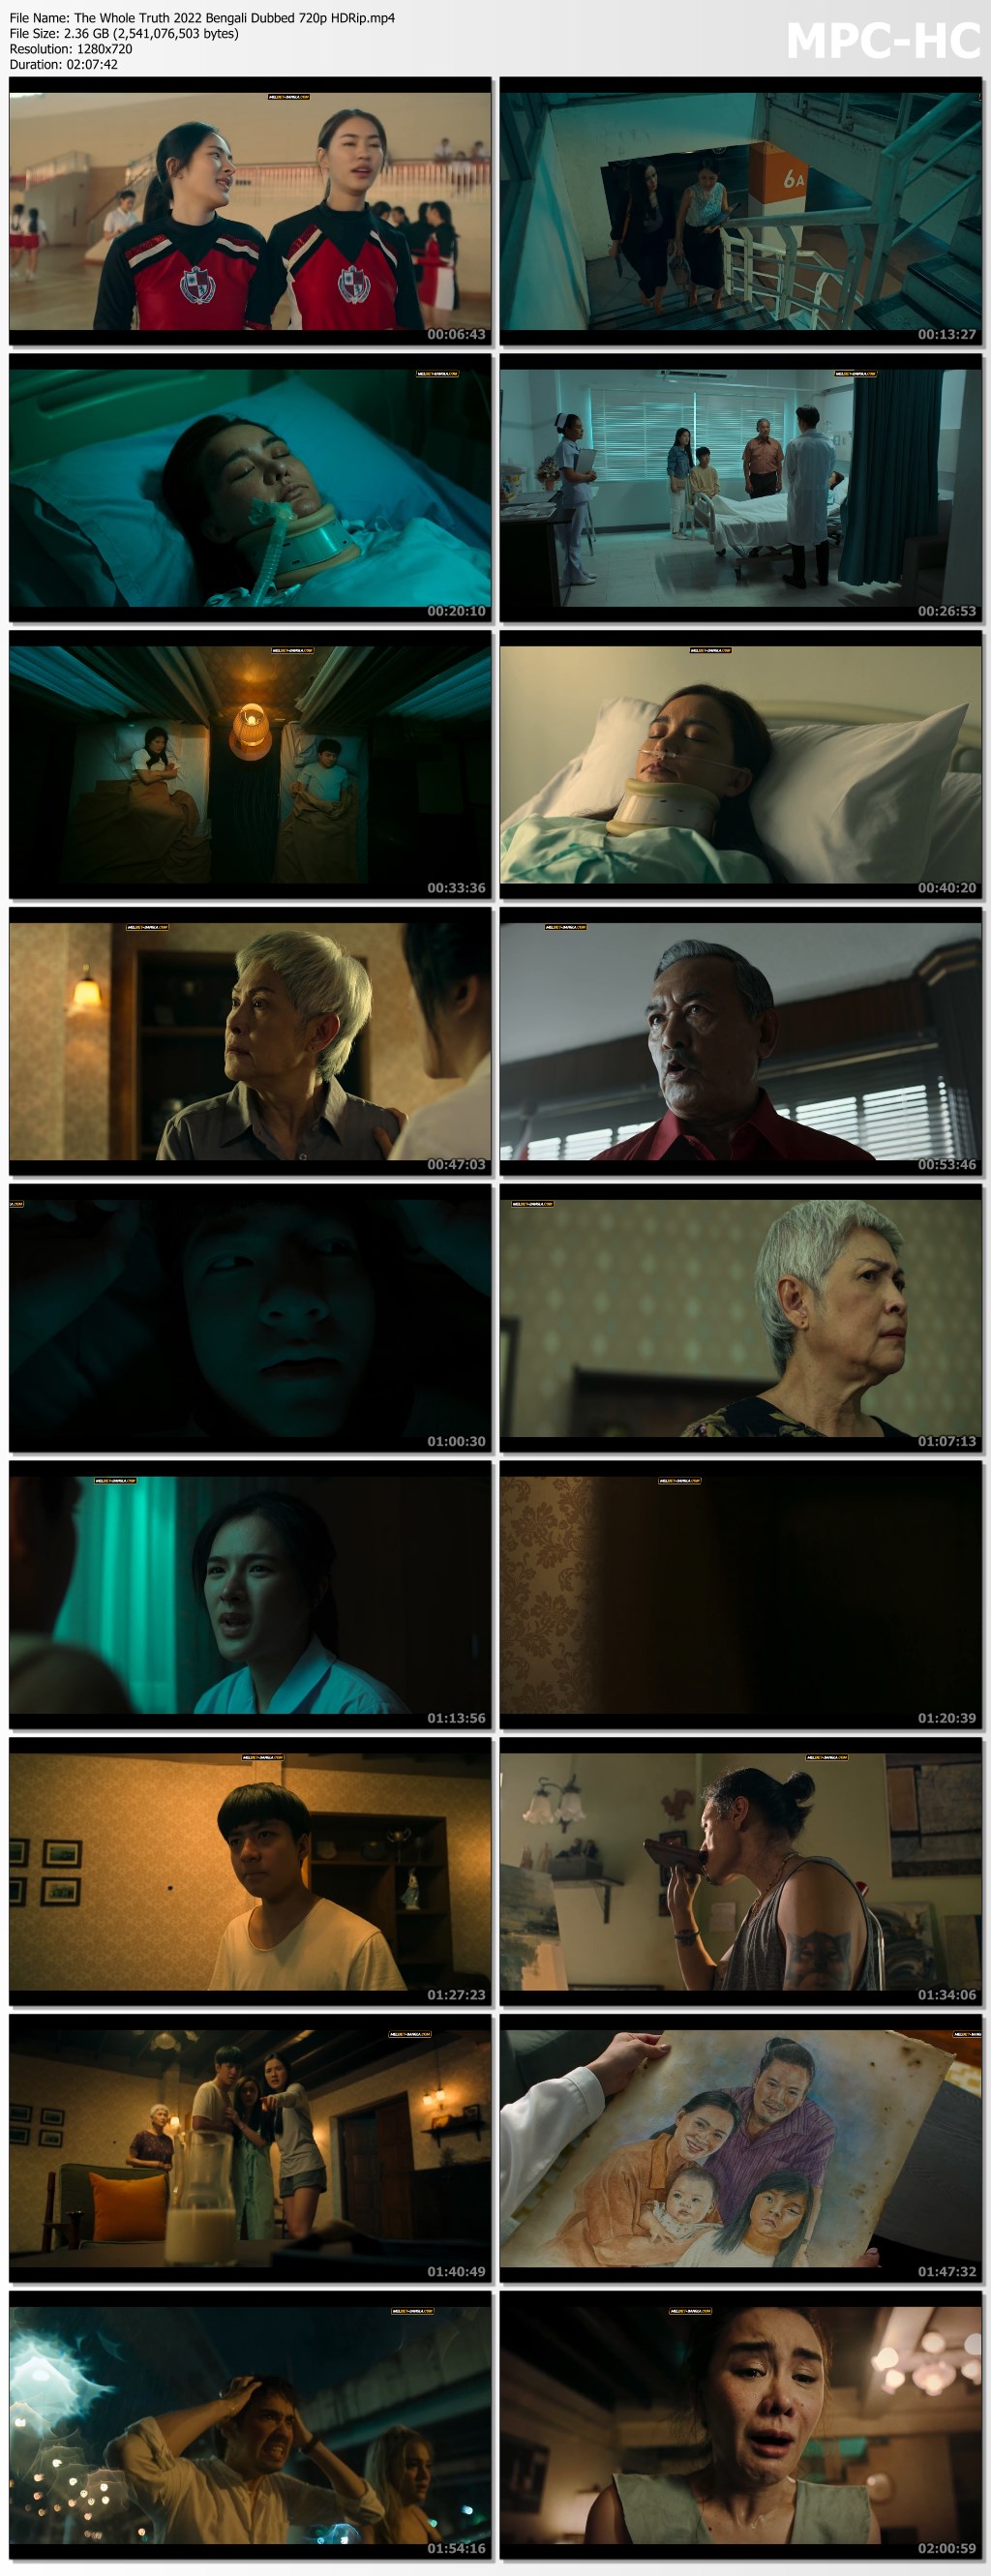 The-Whole-Truth-2022-Bengali-Dubbed-720p-HDRip.mp4_thumbs.jpg